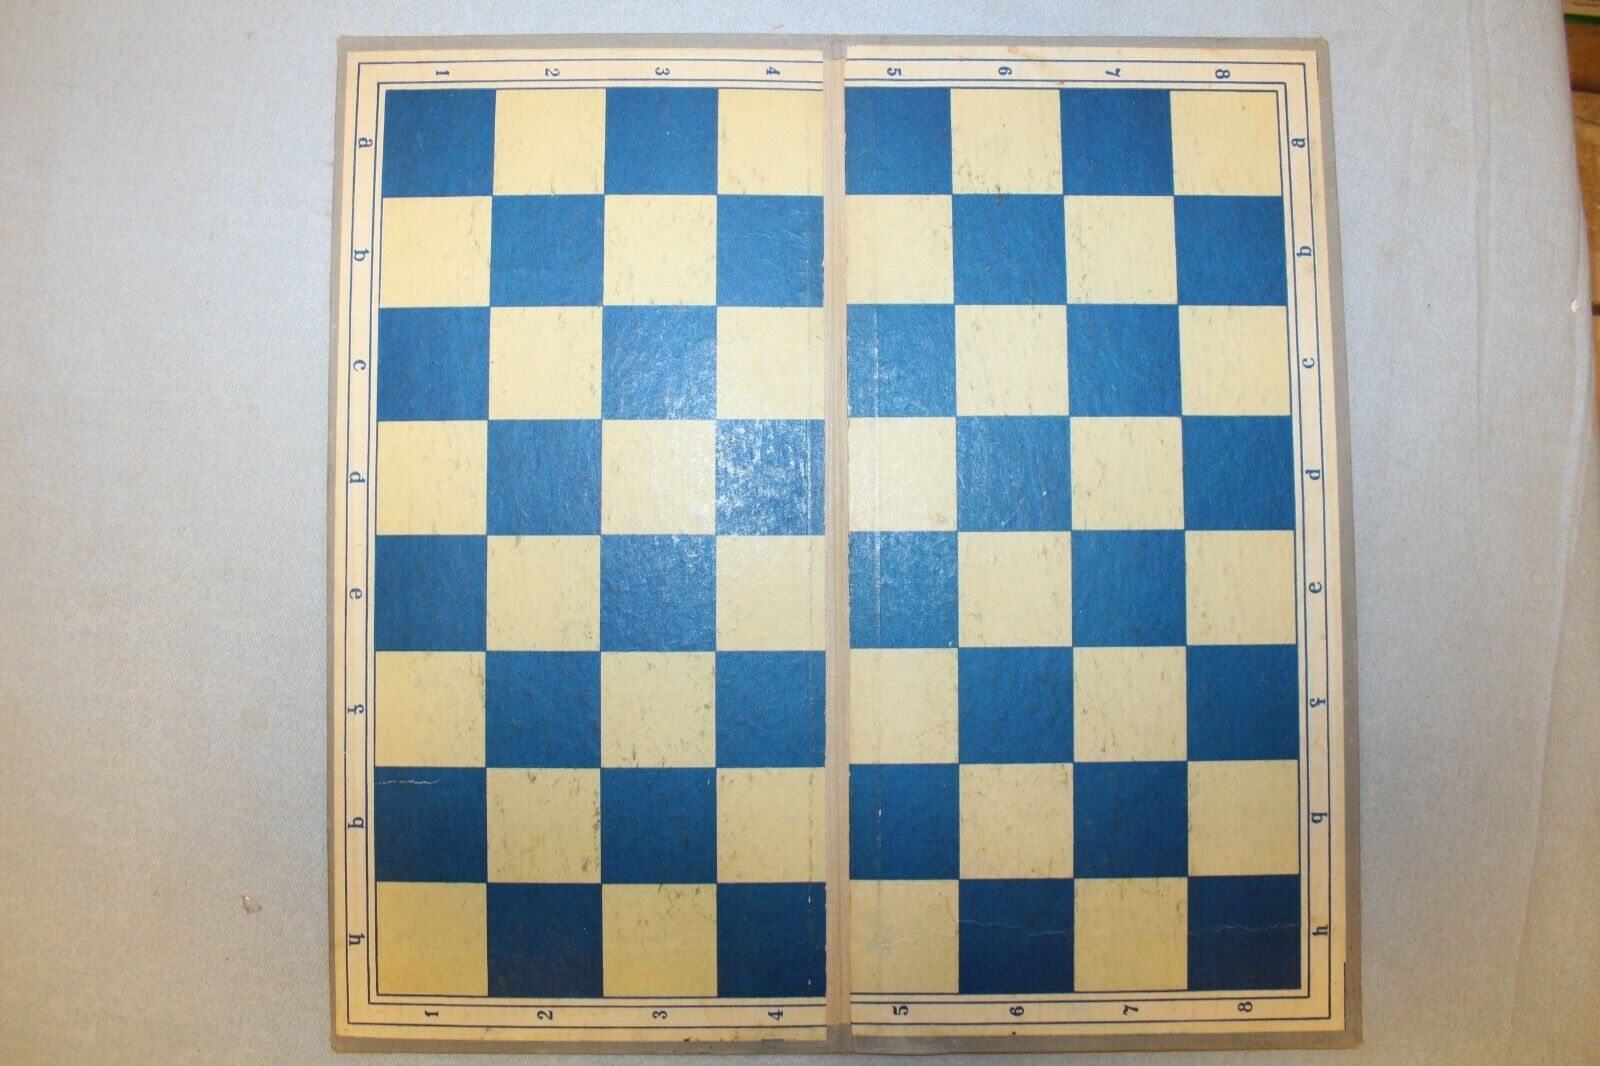 11653.SET of 5 Vintage Russian Chess Cardboard Boards